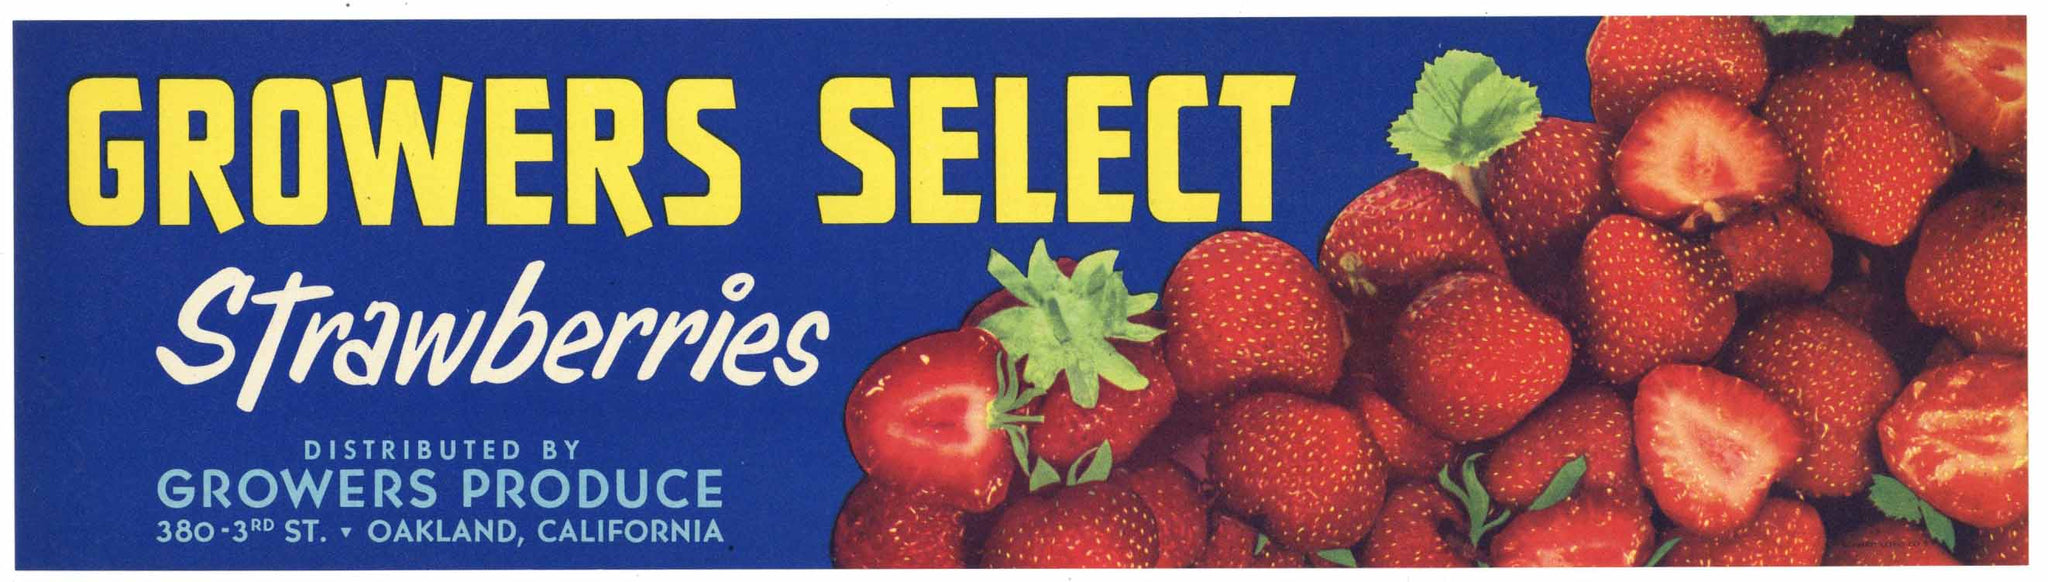 Growers Select Brand Vintage California Strawberry Crate Label